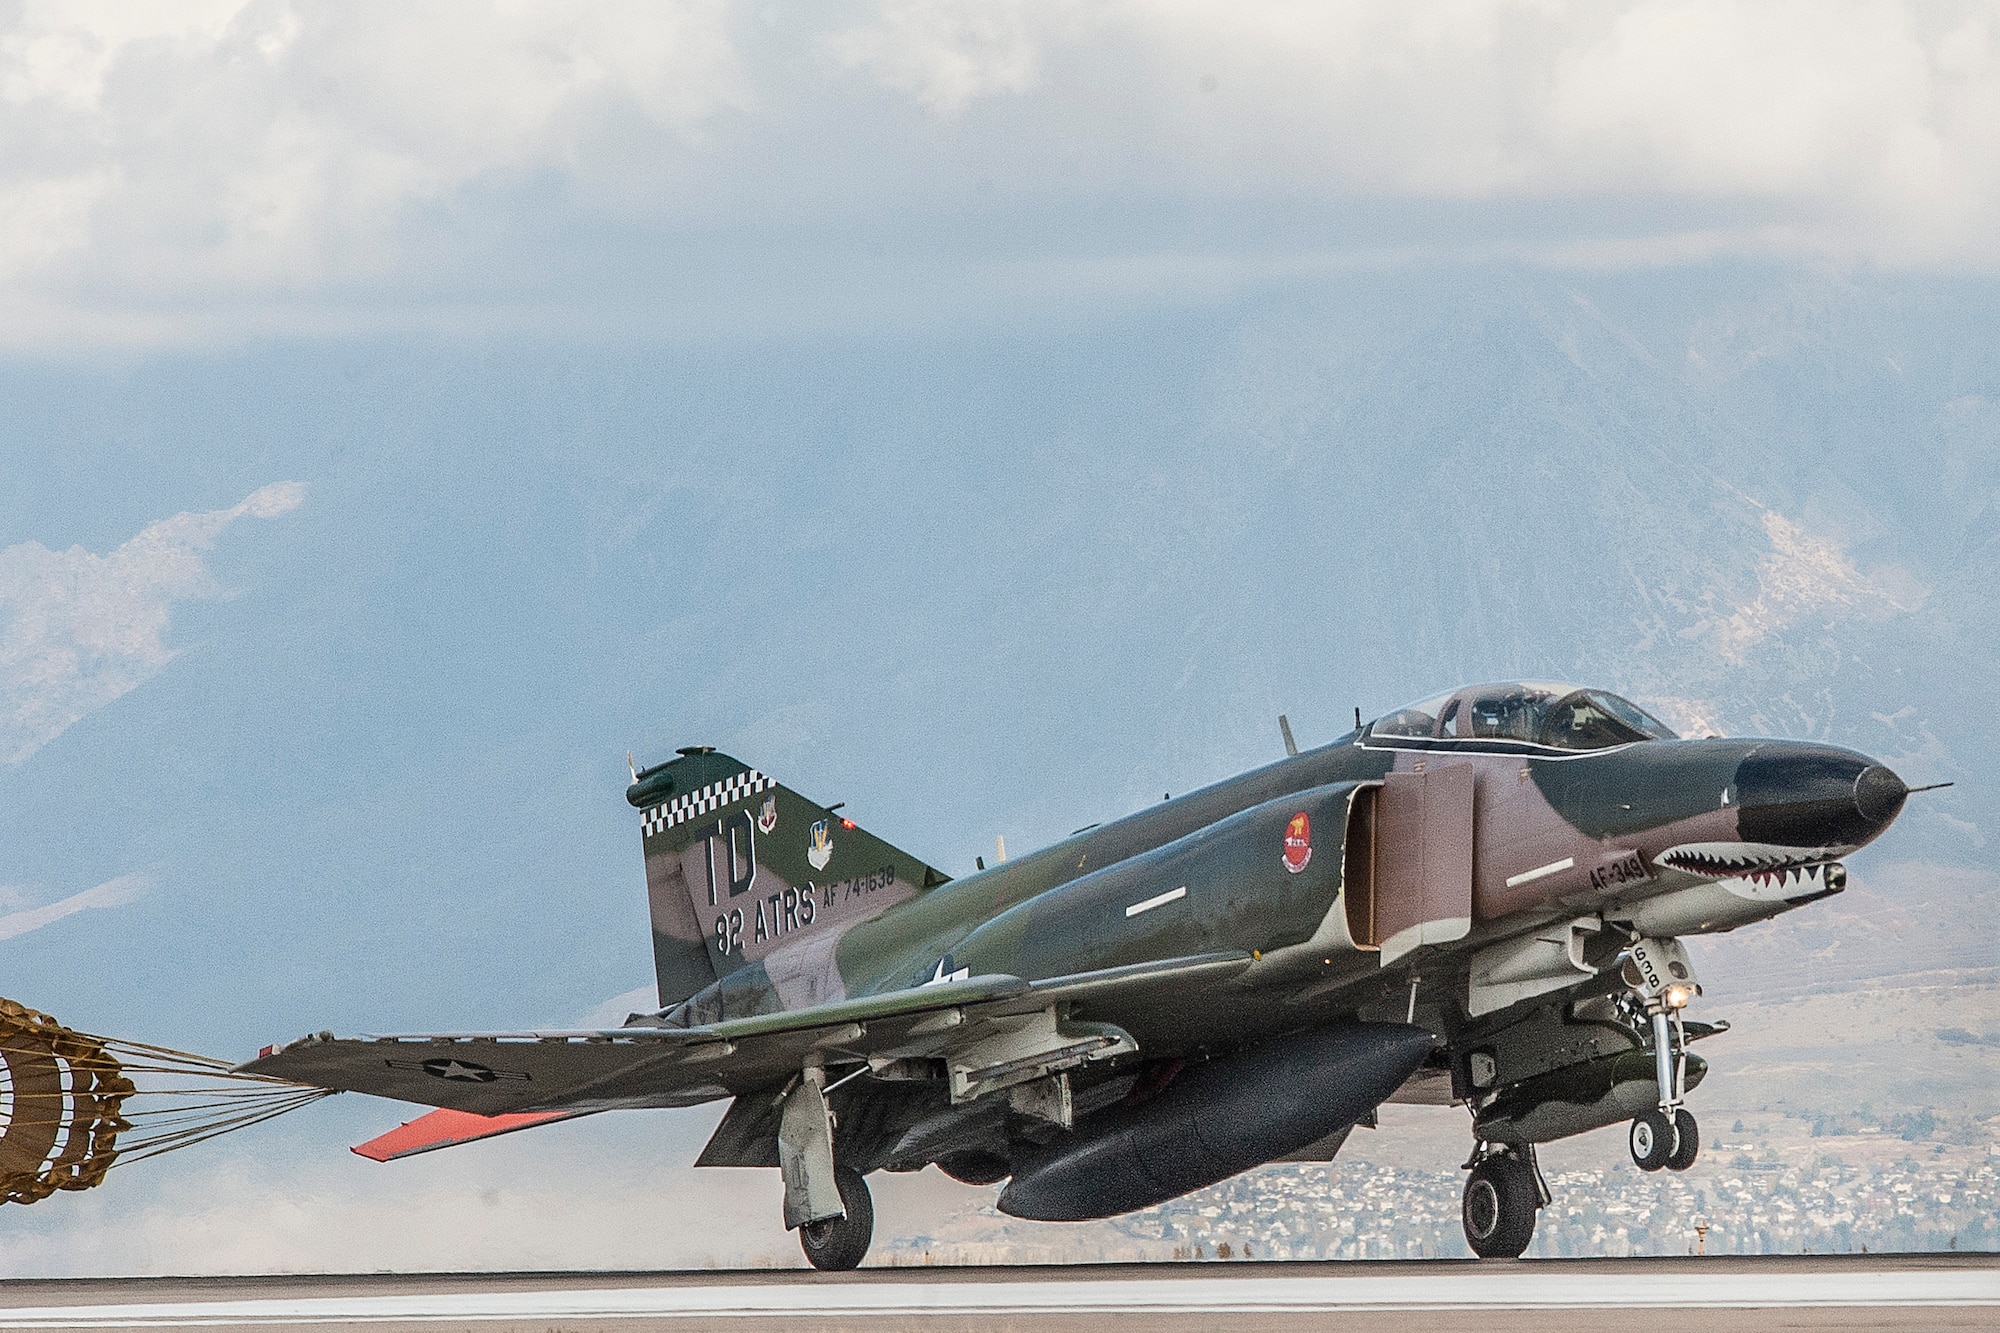 A QF-4 Aerial Target aircraft in manned configuration, piloted by Jim Harkins, 82nd Aerial Targets Squadron, Detachment 1, arrives at Hill Air Force Base, Oct. 25. (U.S. Air Force photo by Paul Holcomb)